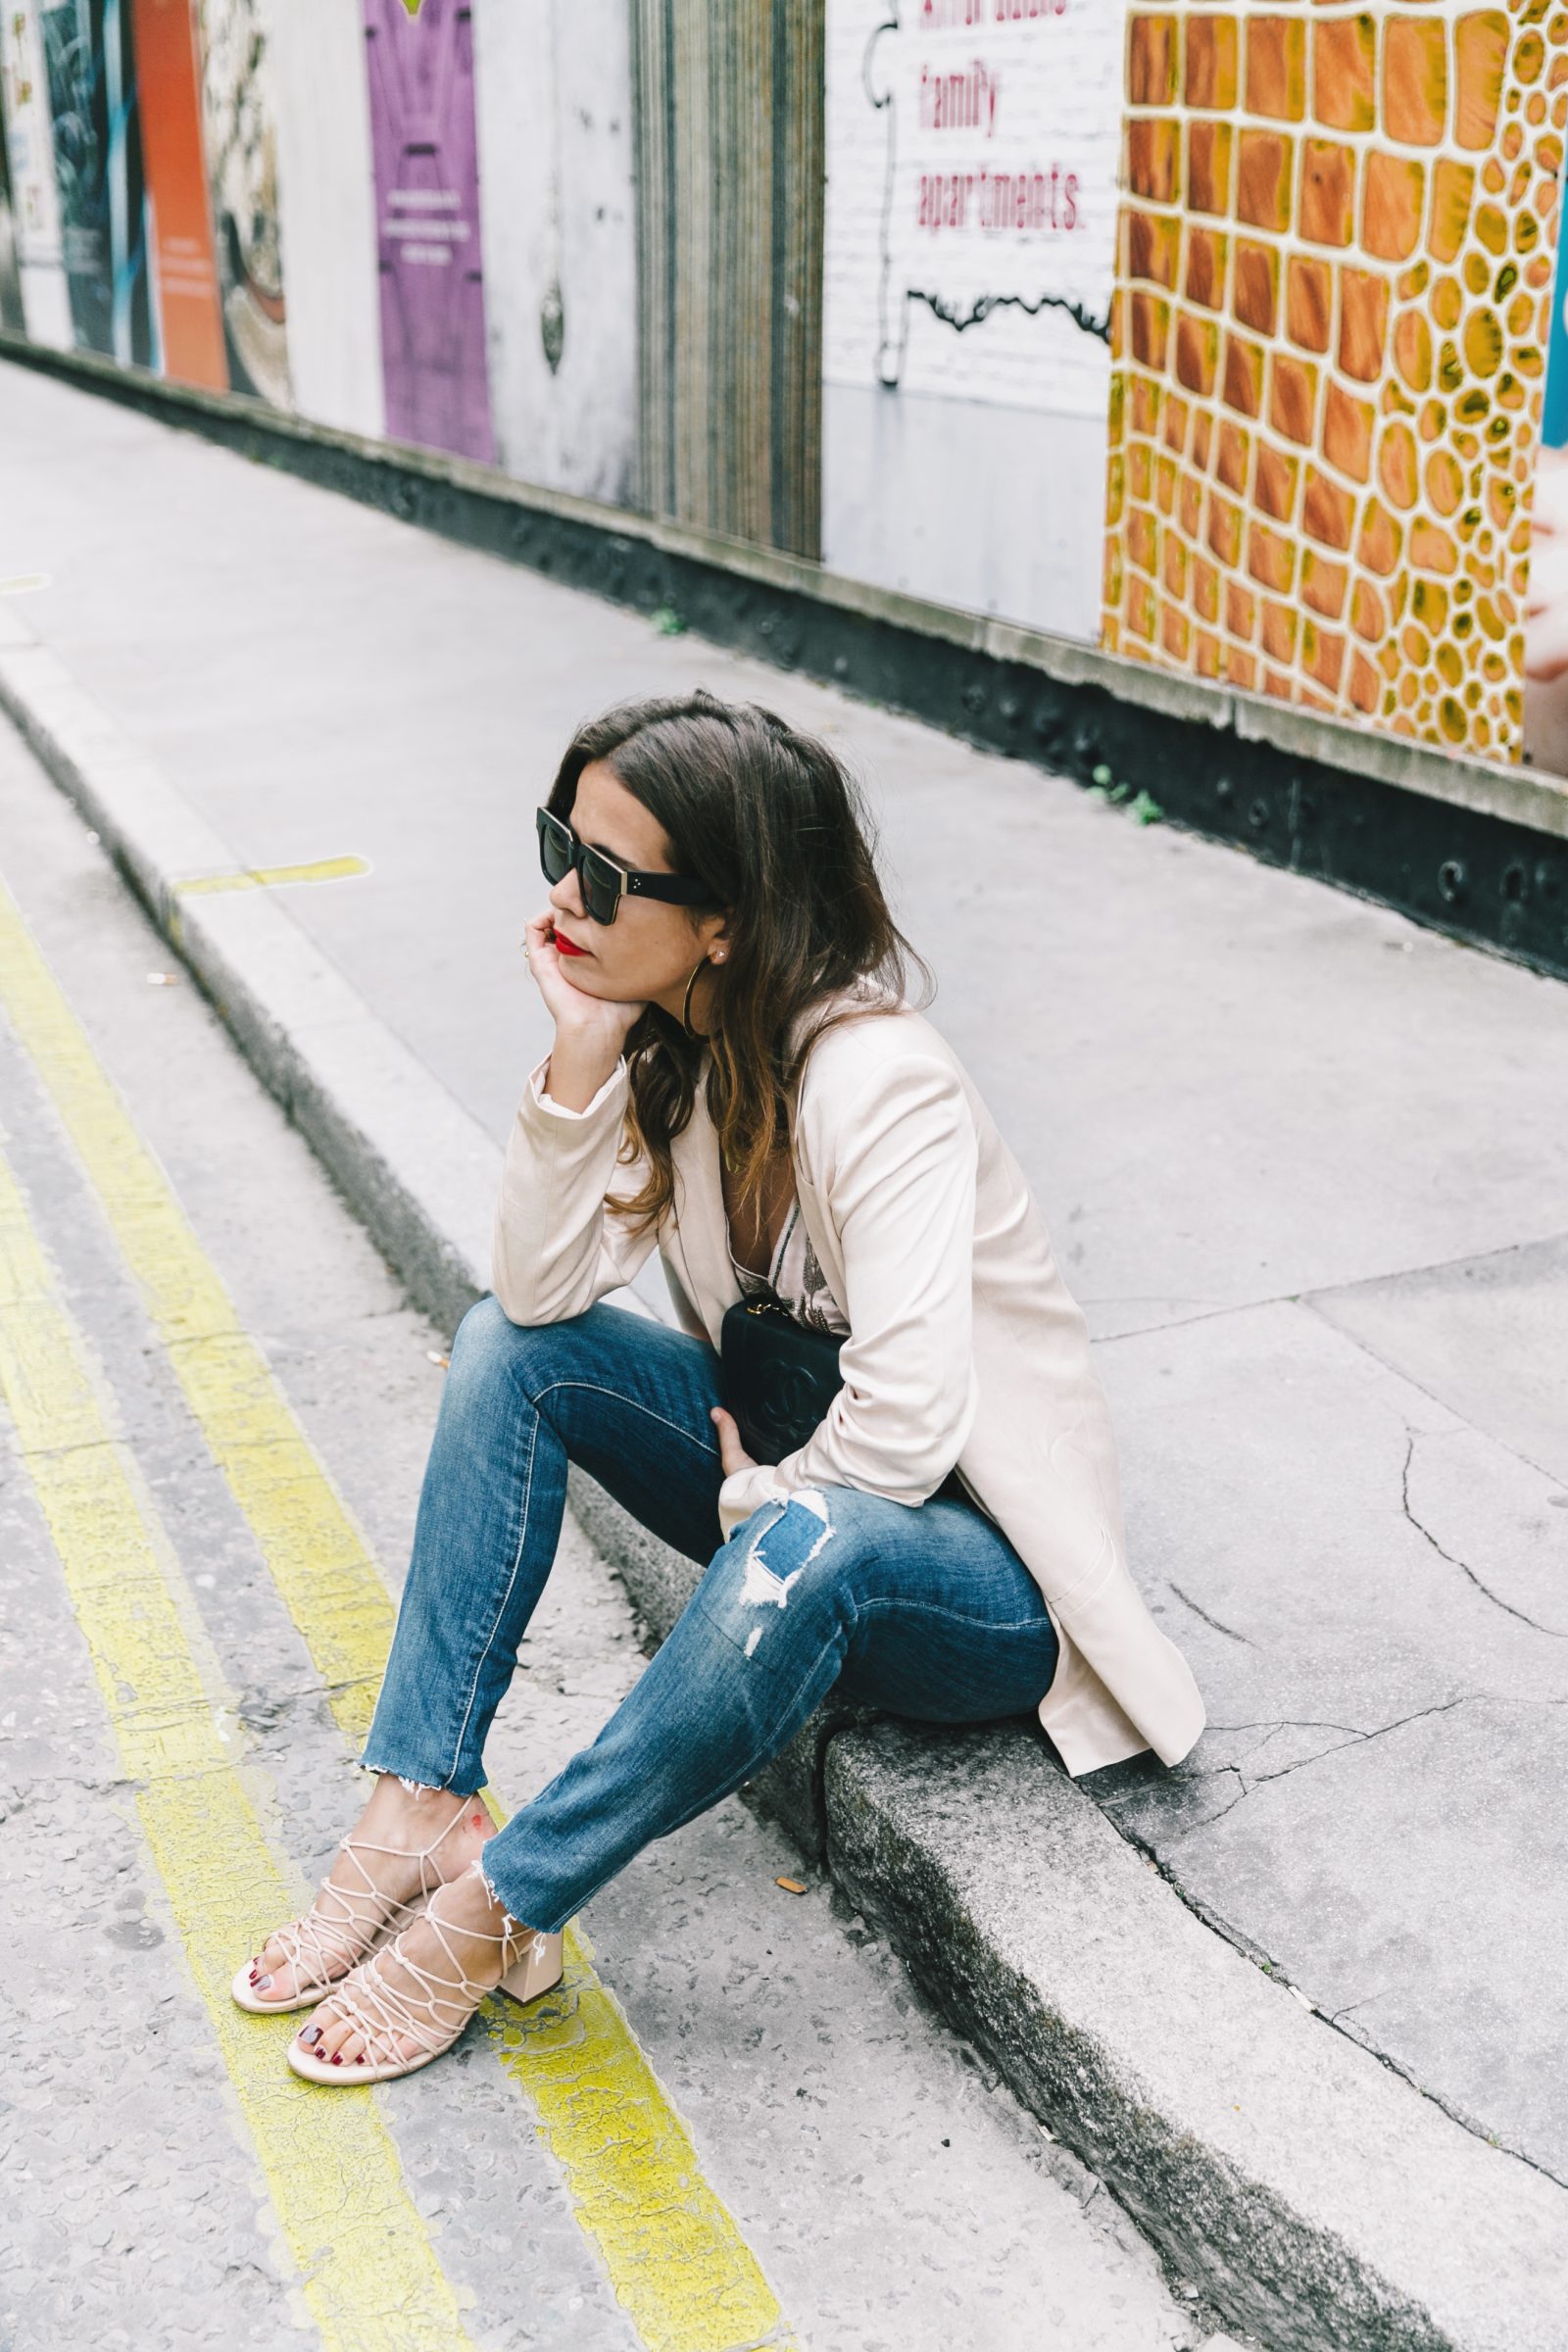 lfw-london_fashion_week_ss17-street_style-outfits-collage_vintage-levis-serie_711-two_looks-141